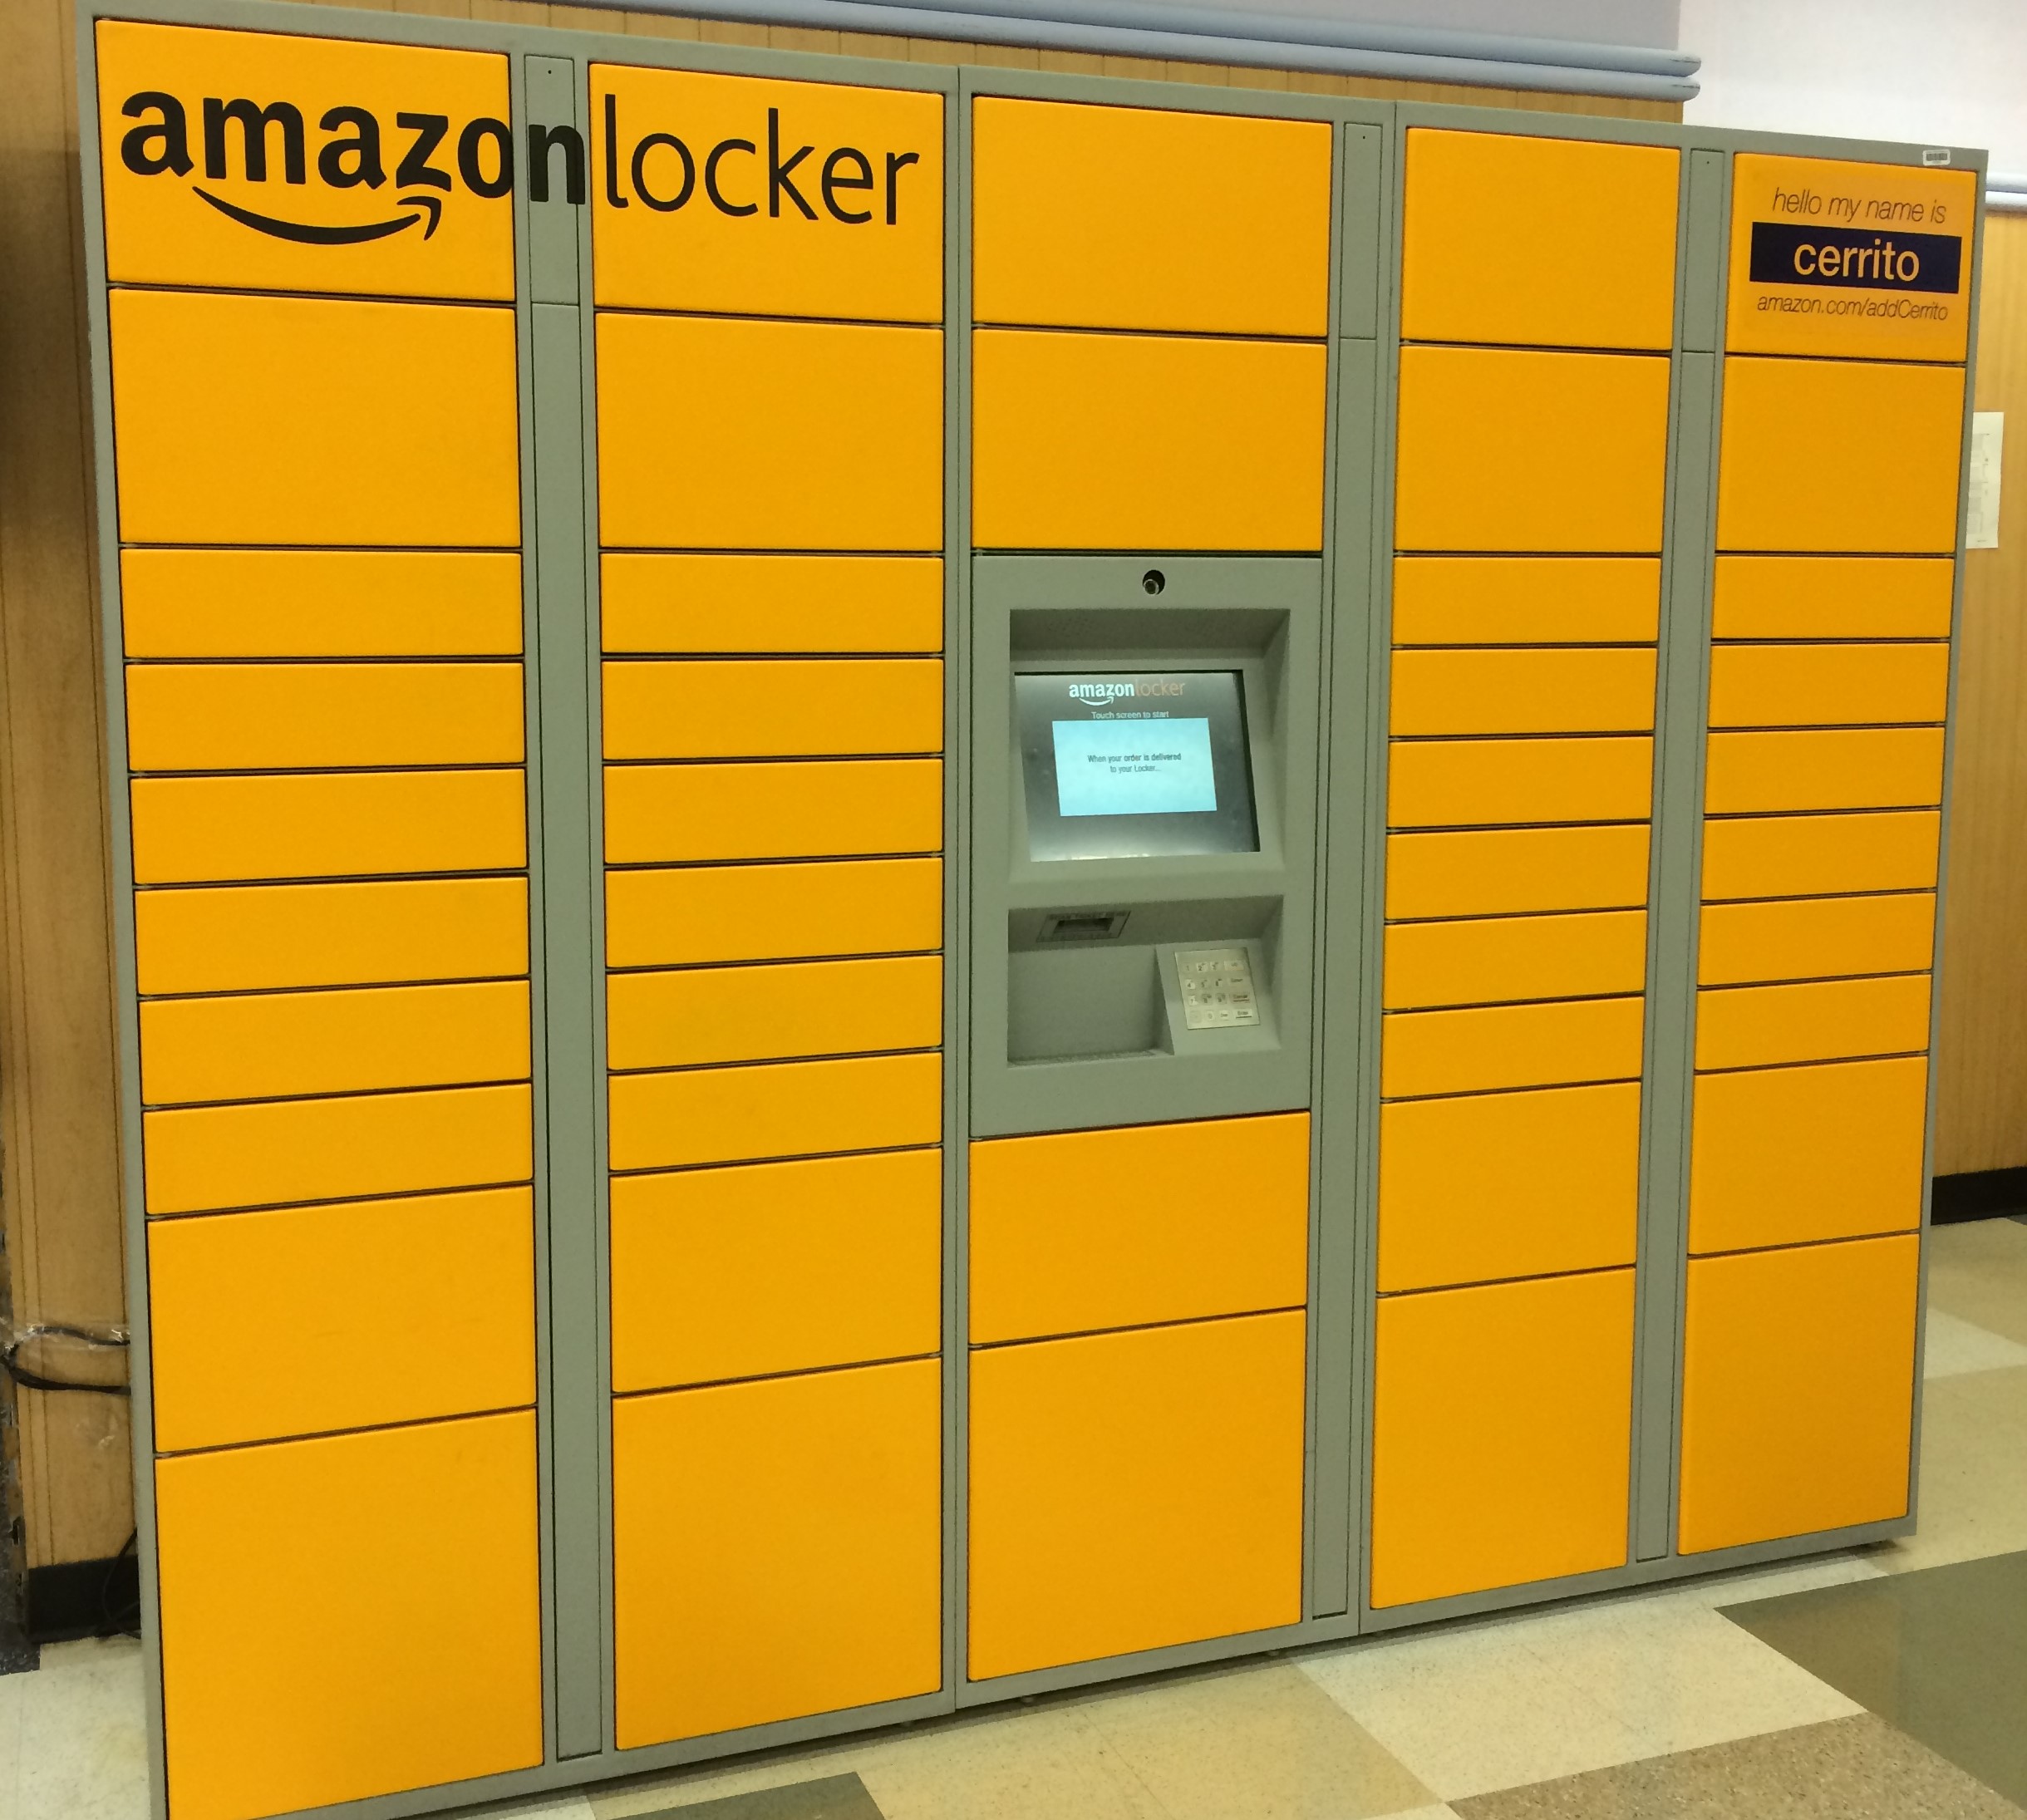 Promoters of Amazon lockers starting to sound desperate